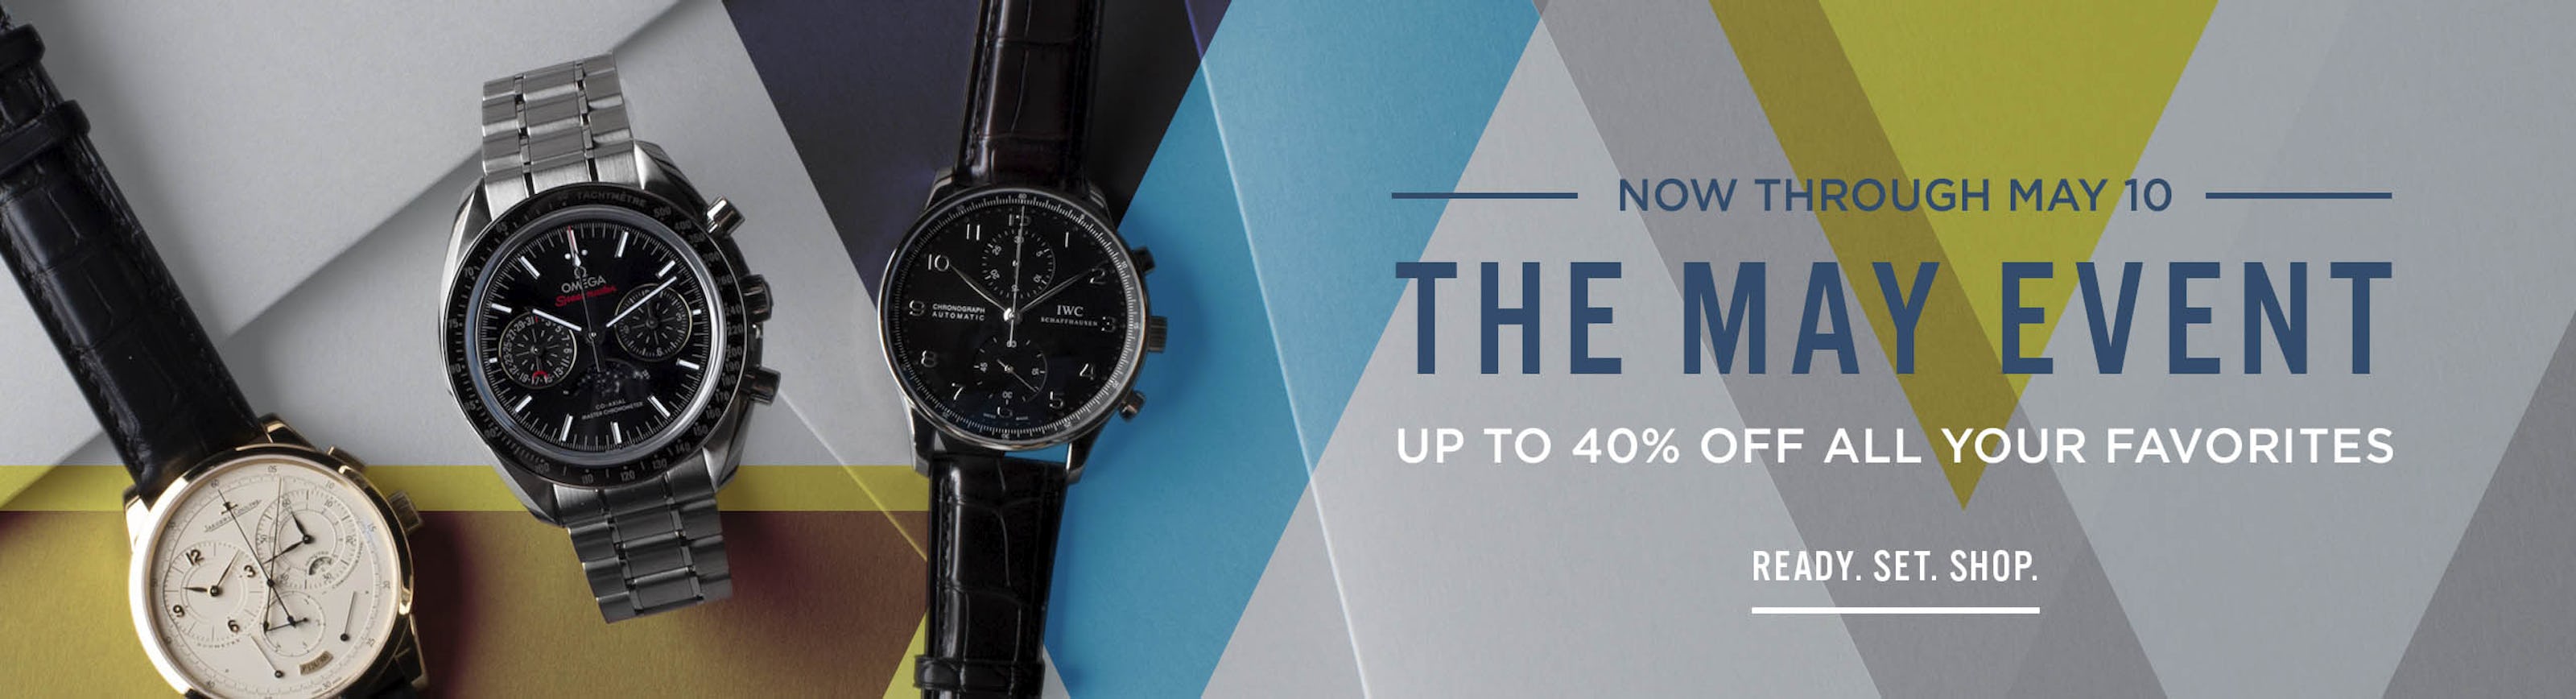 THE MAY EVENT: Shop Over 700 Pre-Owned Watches